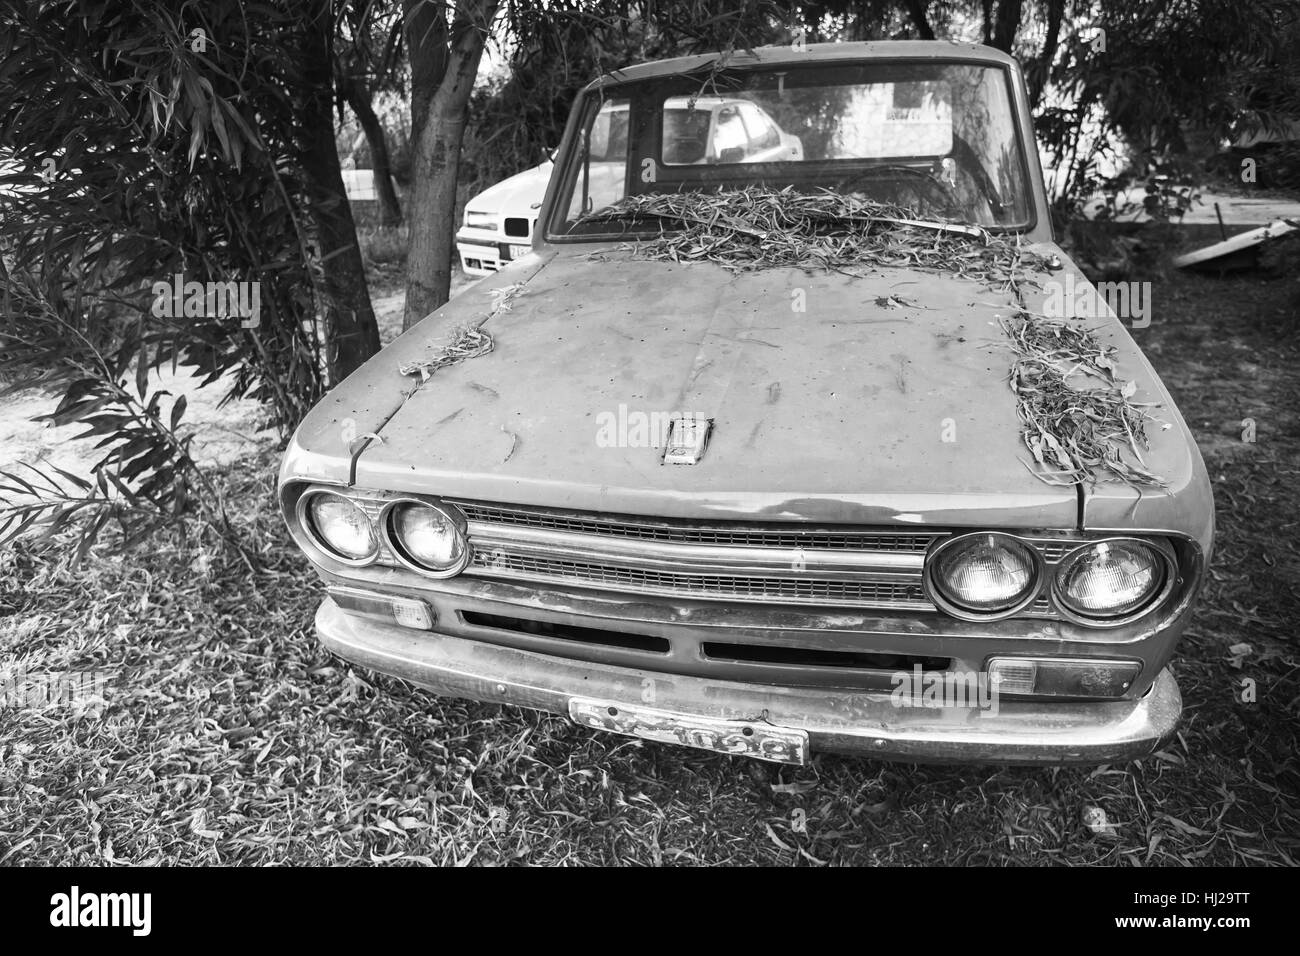 Zakynthos, Greece - August 16, 2016: closeup front view of old Datsun 1300 pickup car, black and white photo Stock Photo